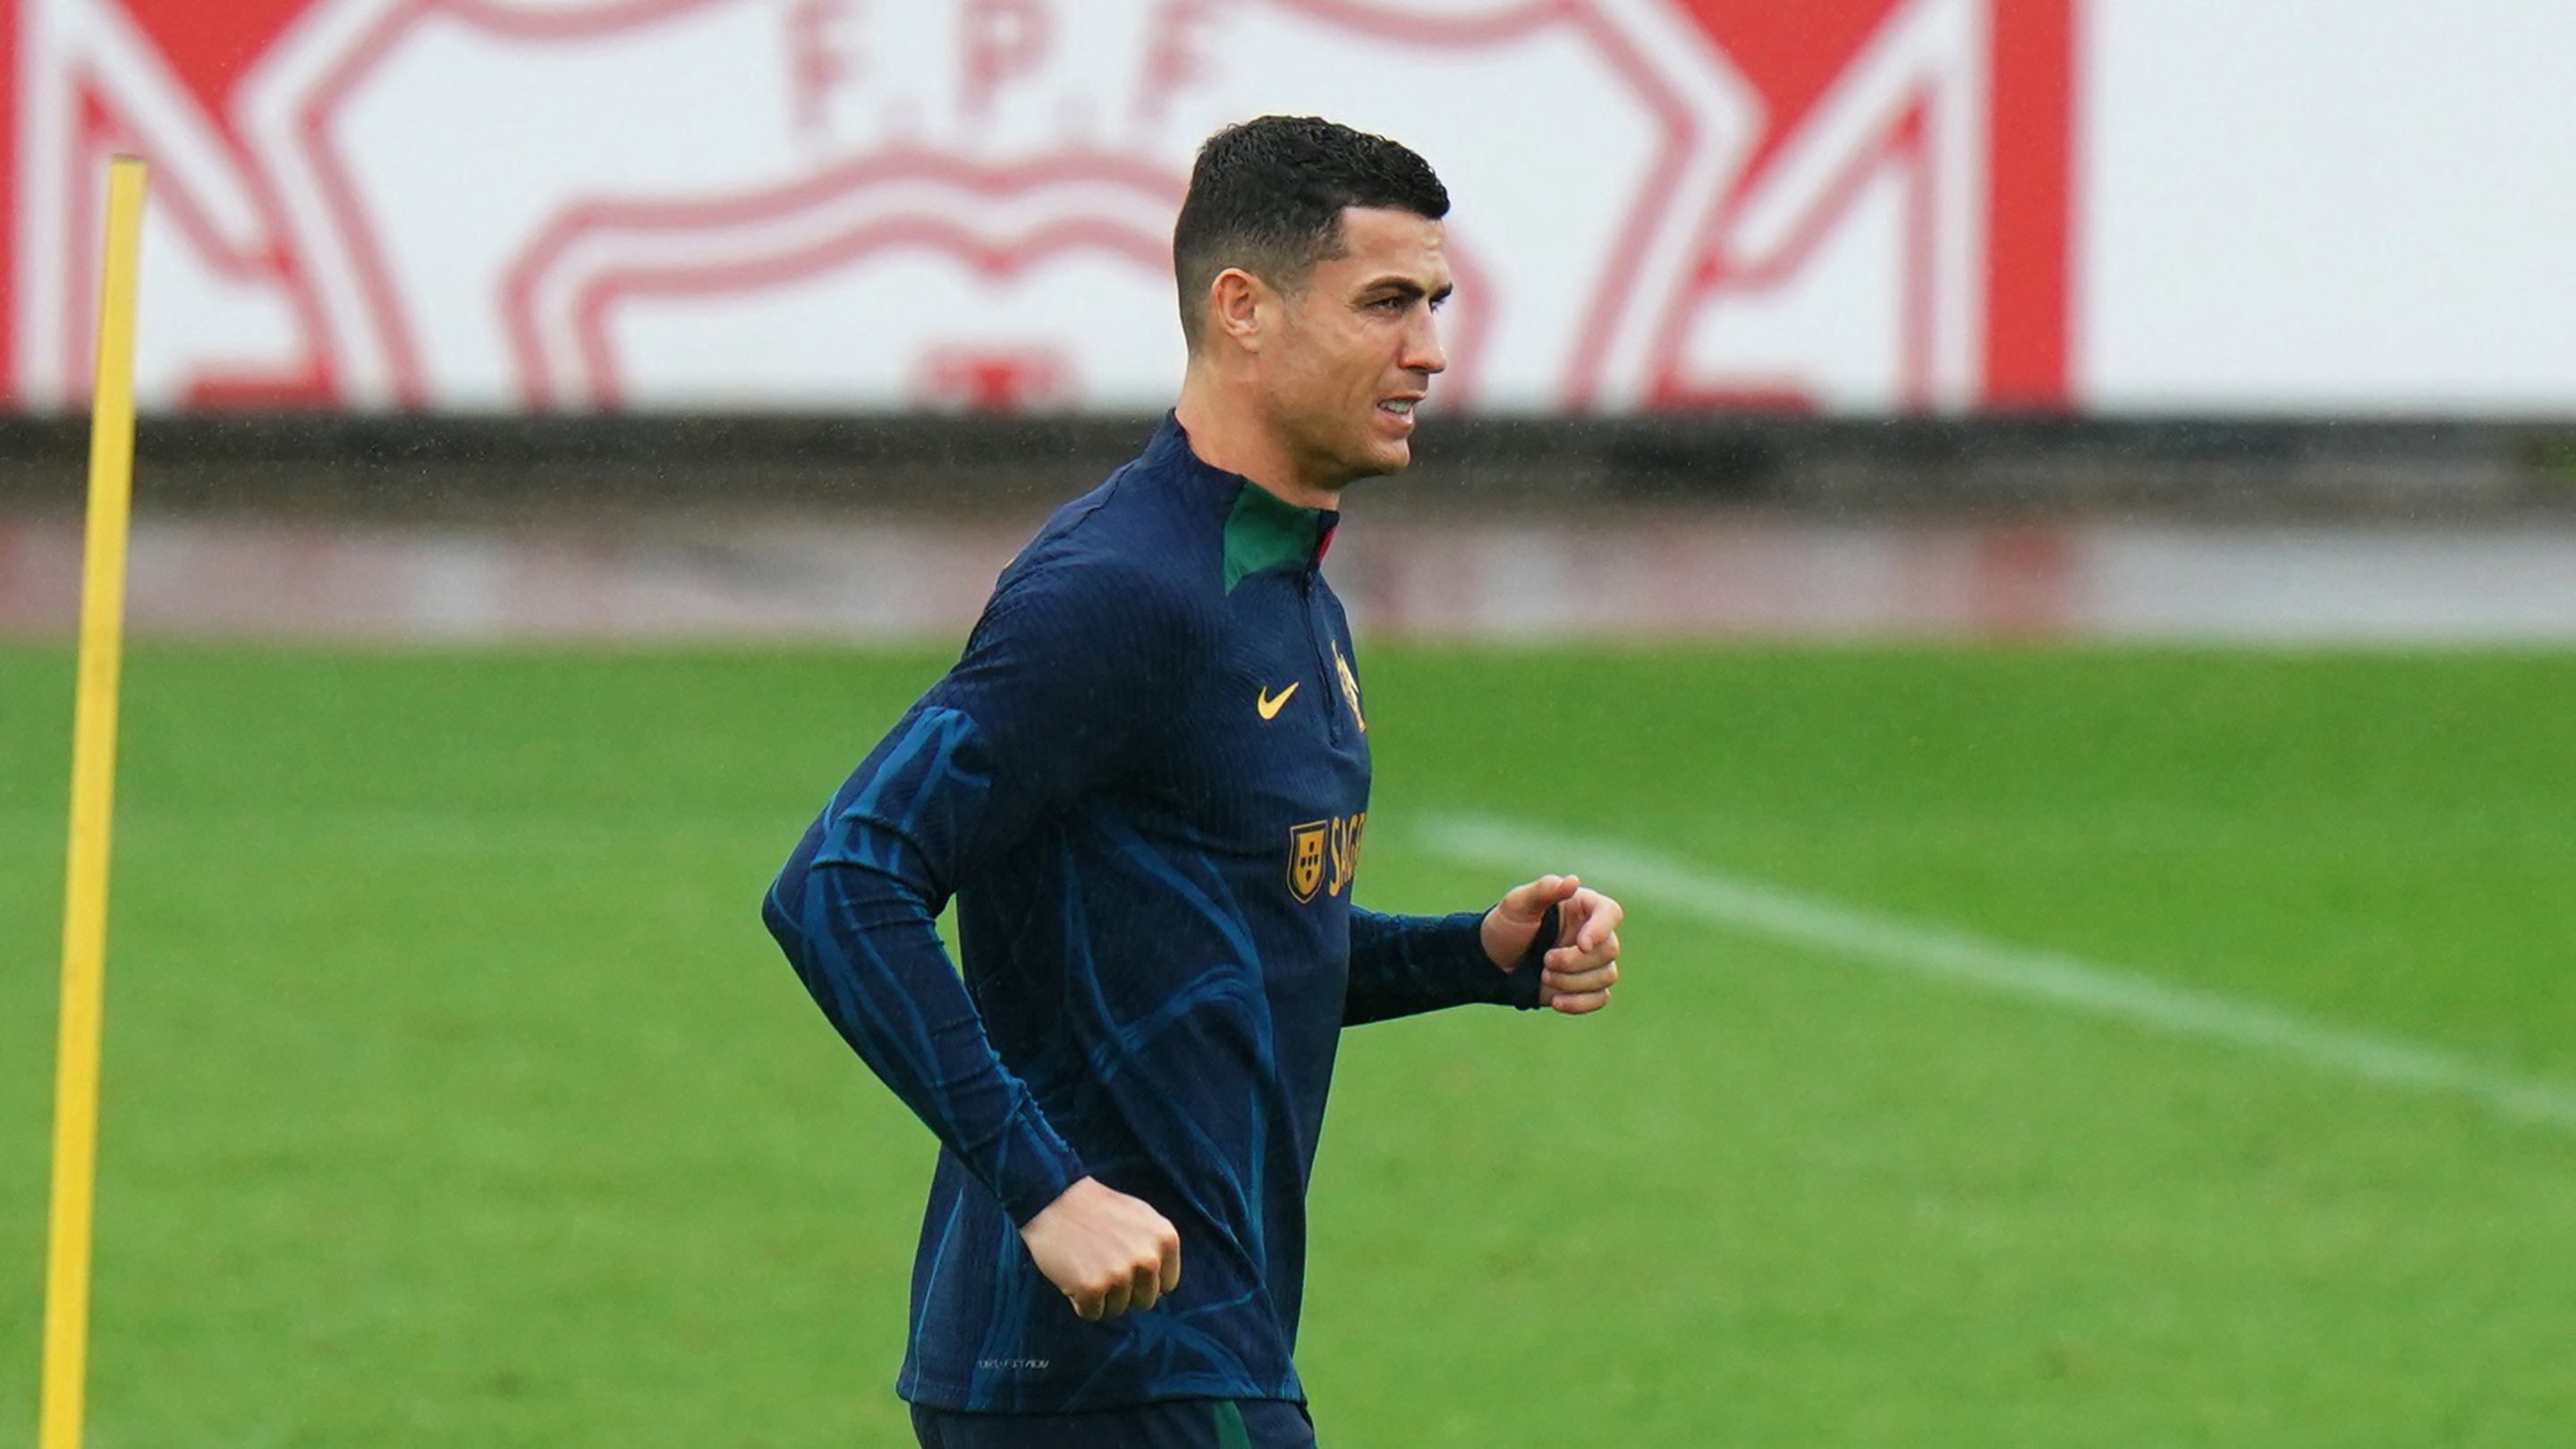 Cristiano Ronaldo insists he has 'nothing to prove' at World Cup